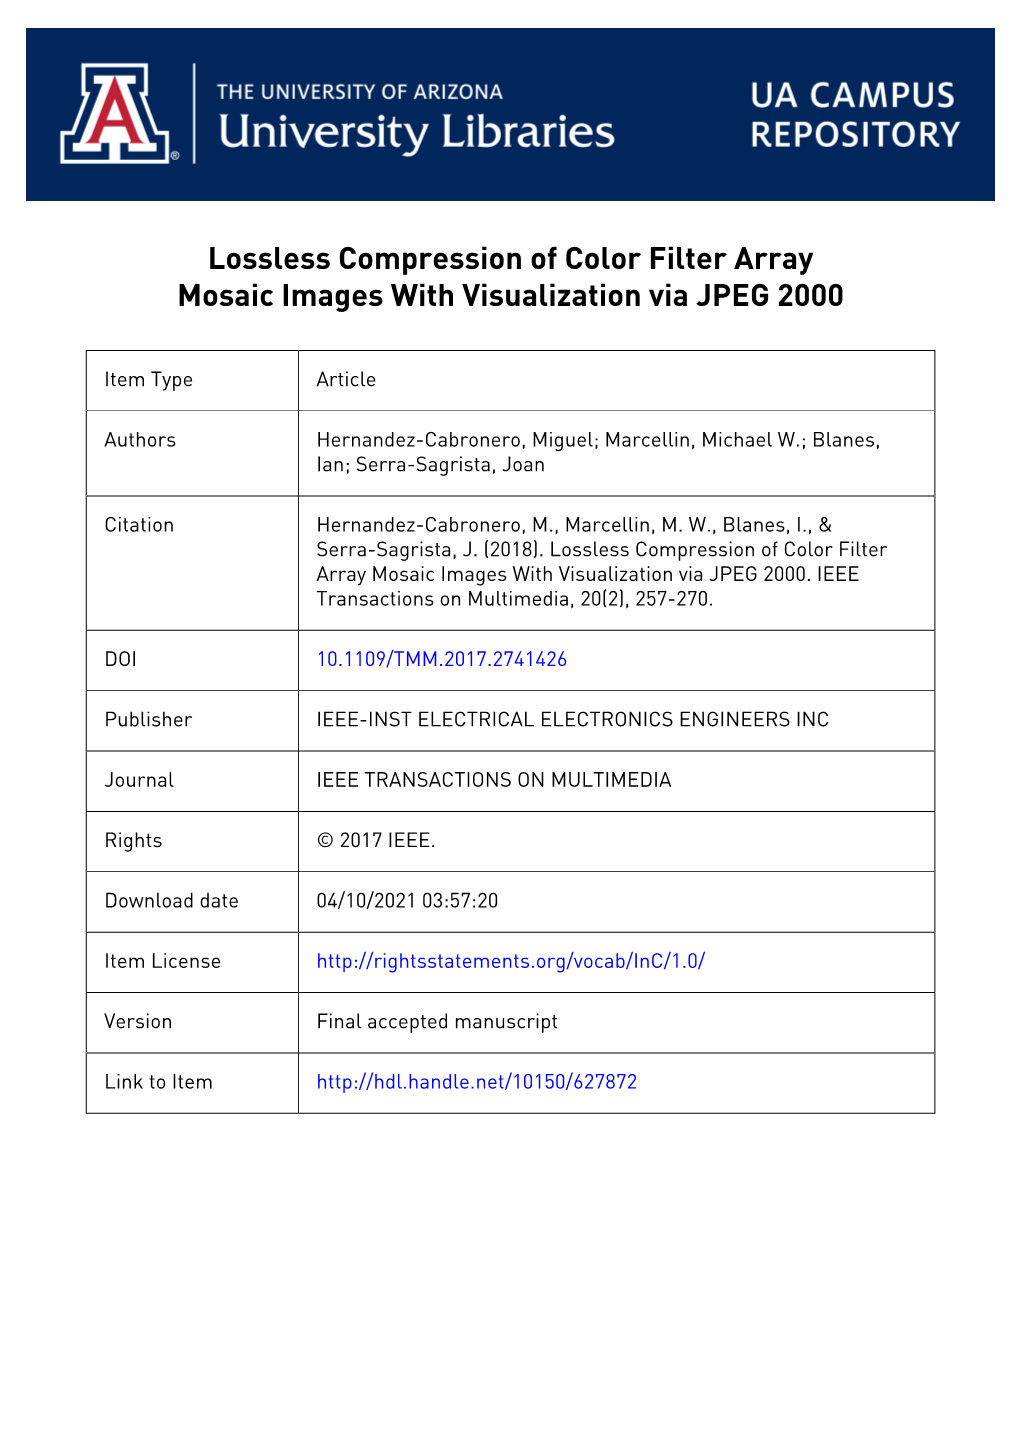 Lossless Compression of Color Filter Array Mosaic Images with Visualization Via JPEG 2000